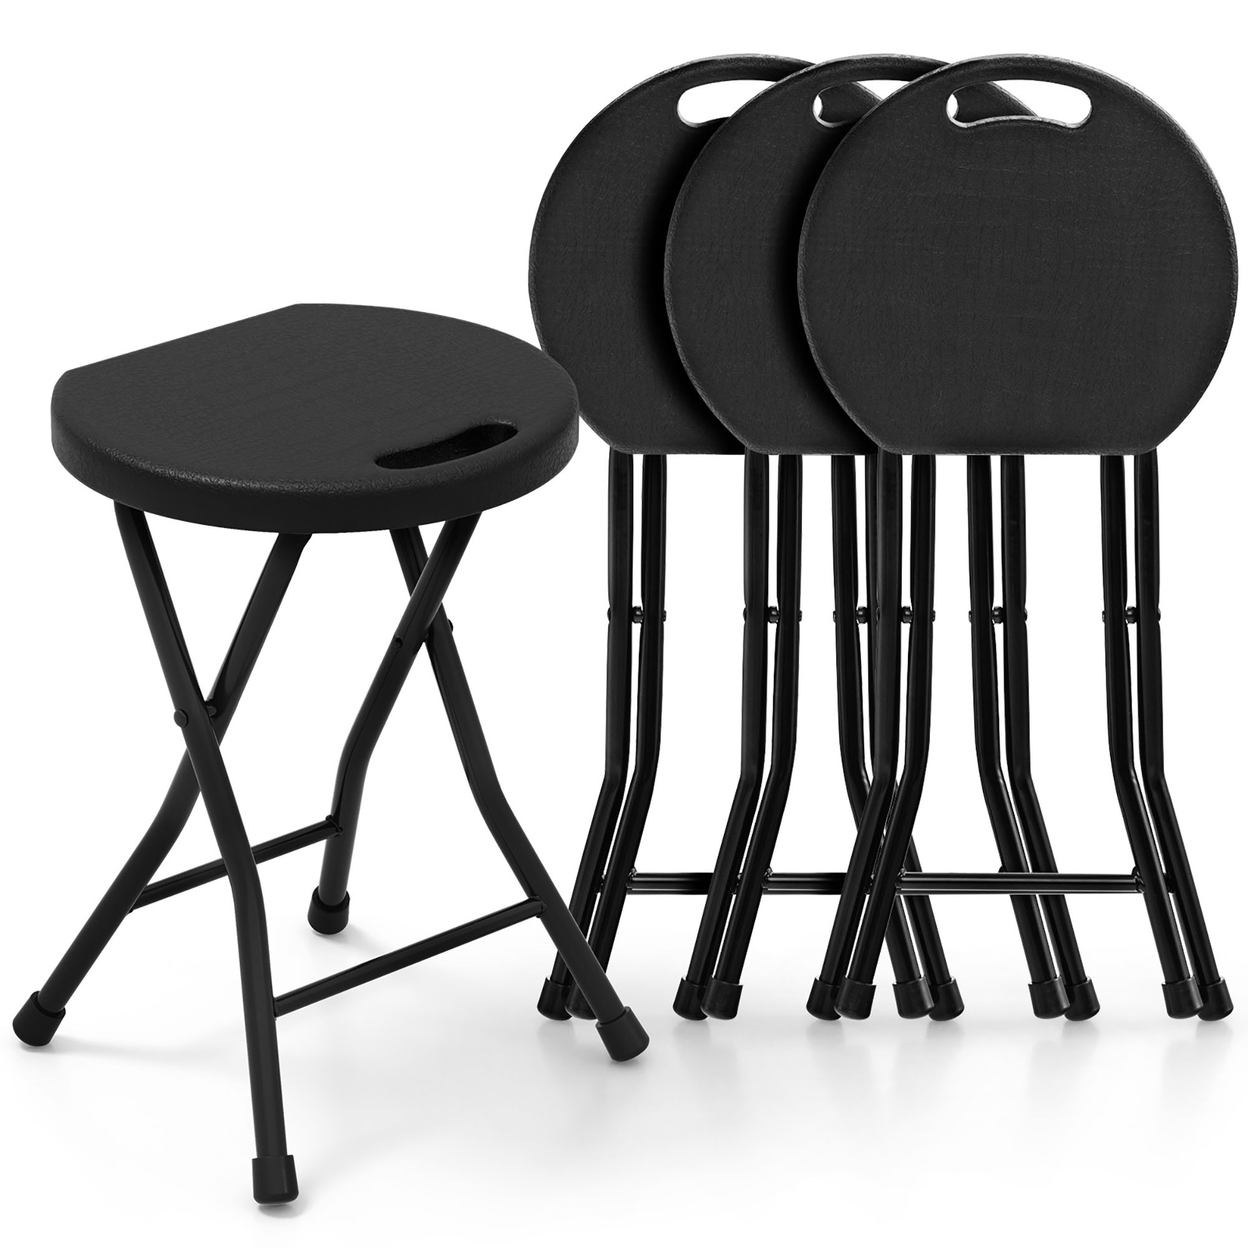 Set Of 4 Outdoor Folding Stool Portable Space-Saving Round X Shaped Chair Black